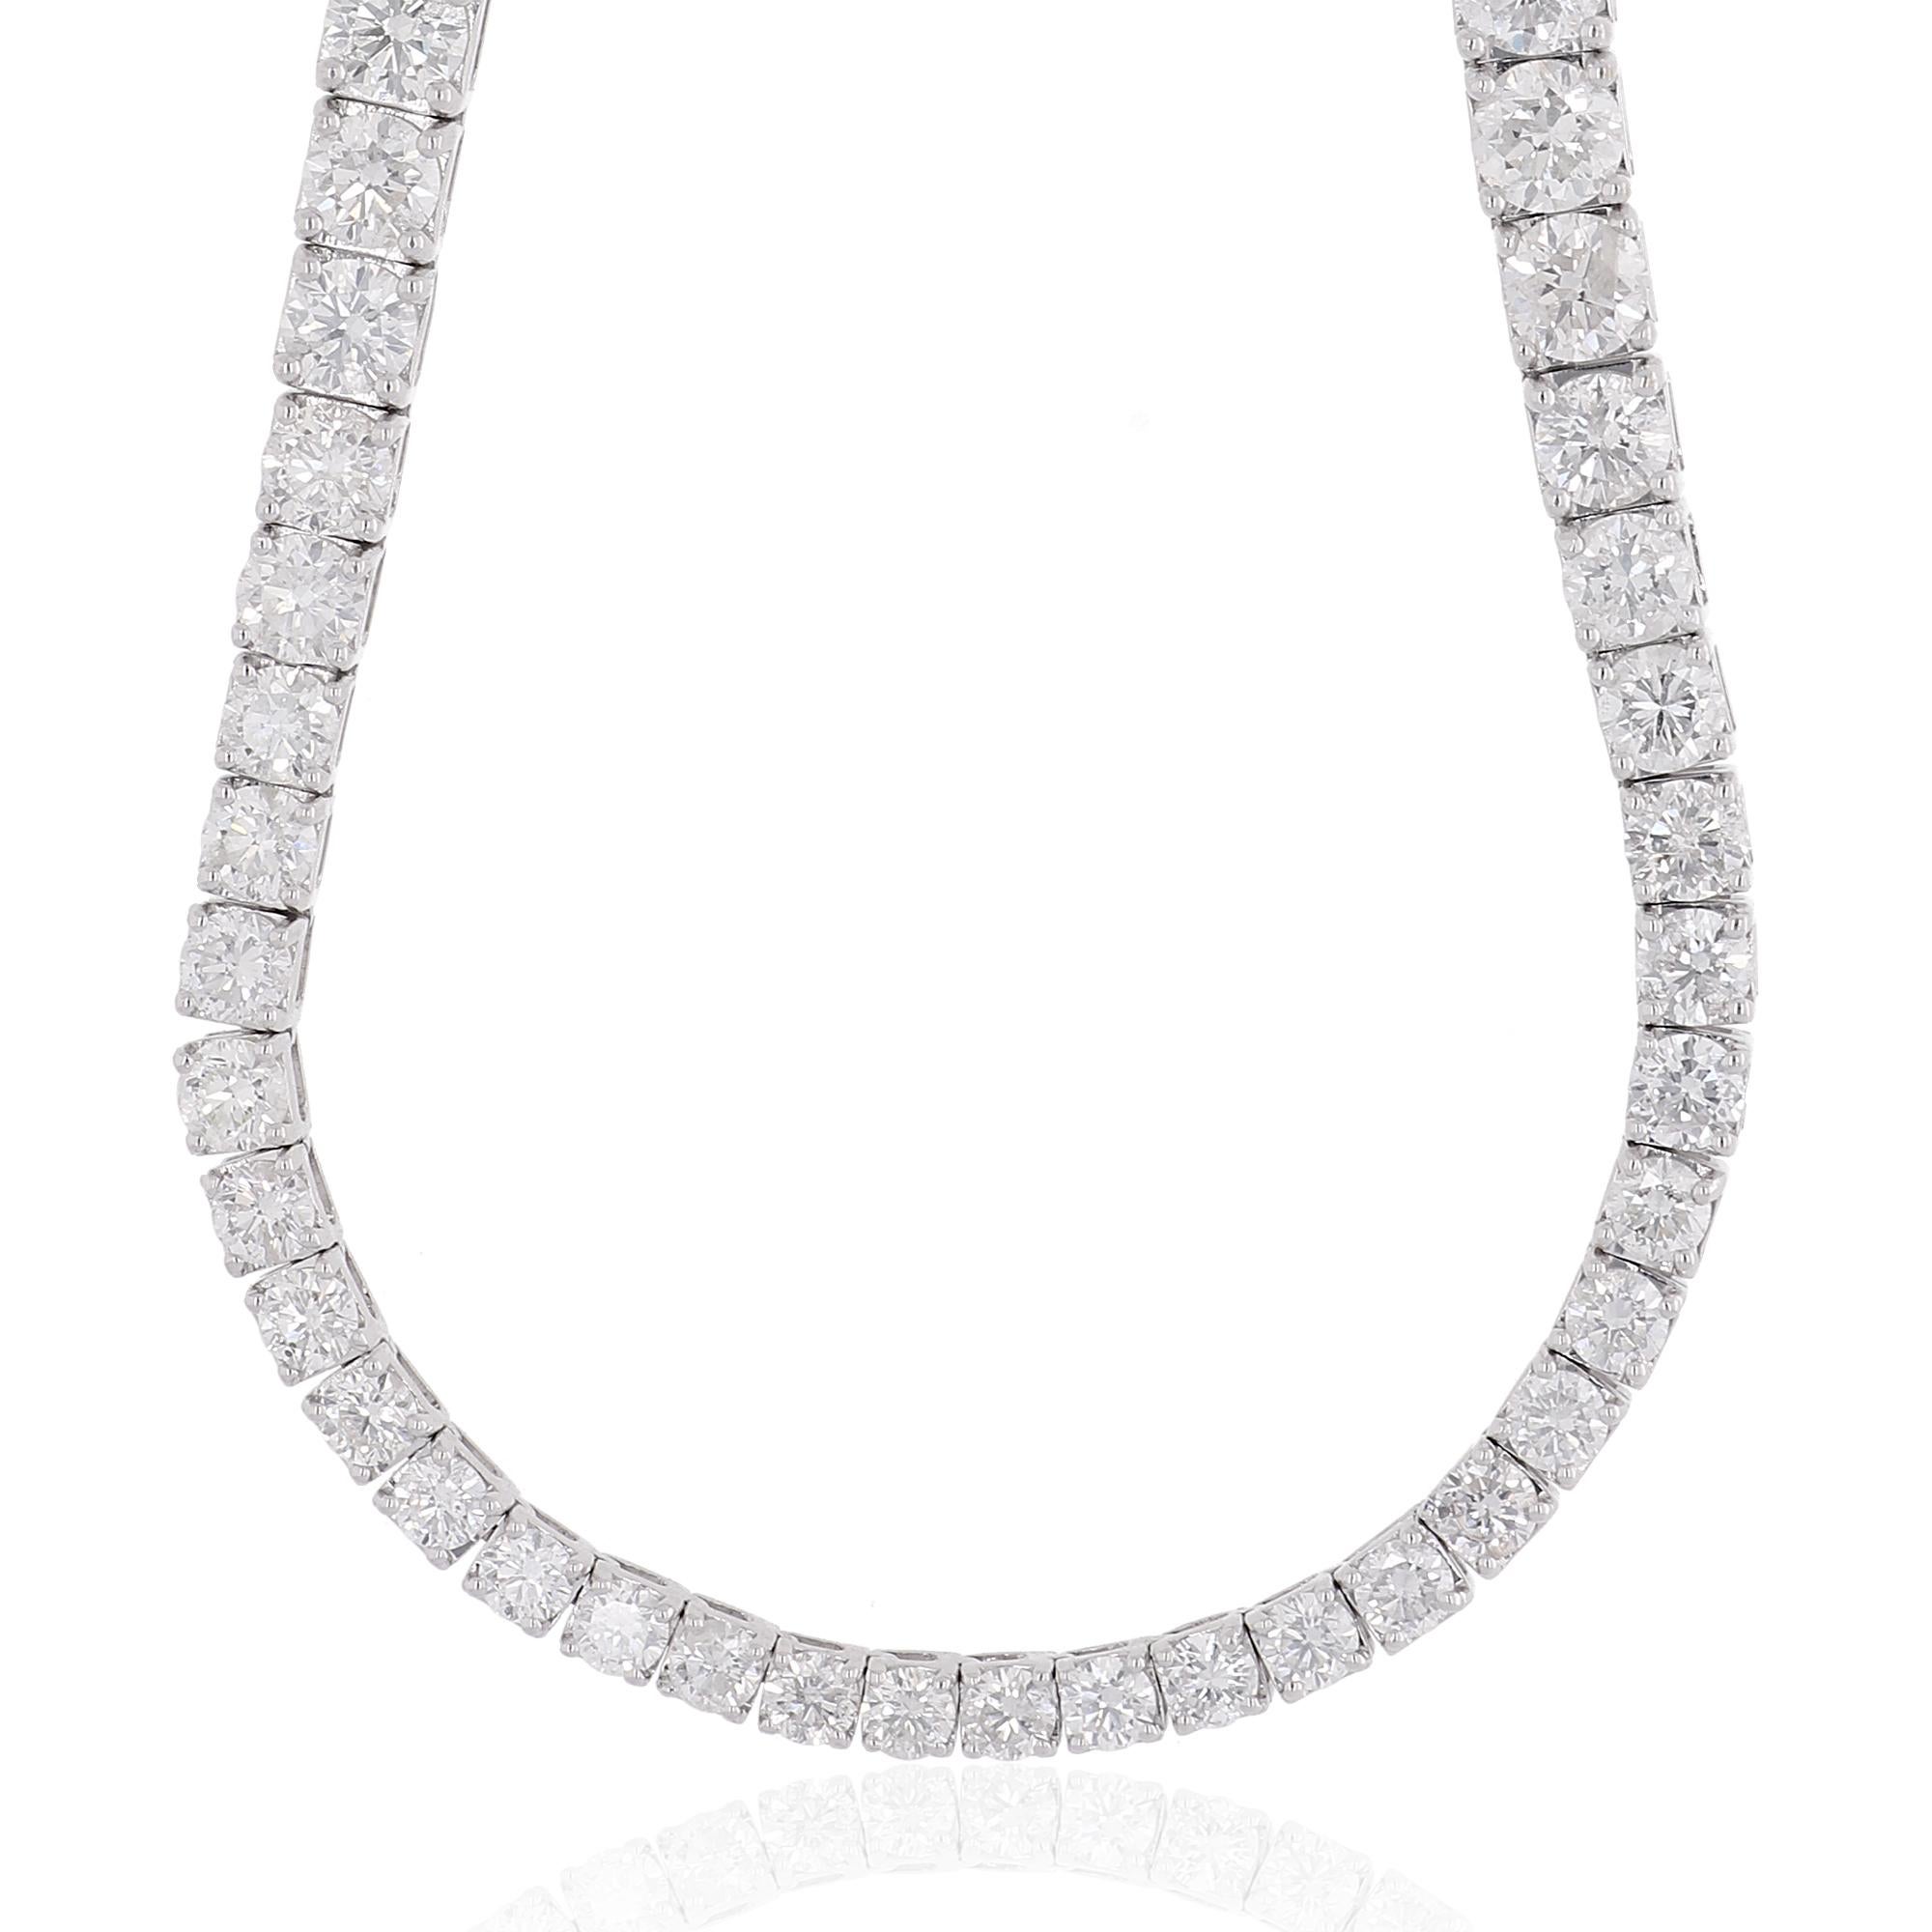 The centerpiece of this necklace is a stunning round diamond, carefully selected for its impressive 15.6-carat weight, SI clarity, and HI color. The diamond's exceptional clarity allows for an uninterrupted play of light, while its HI color emits a